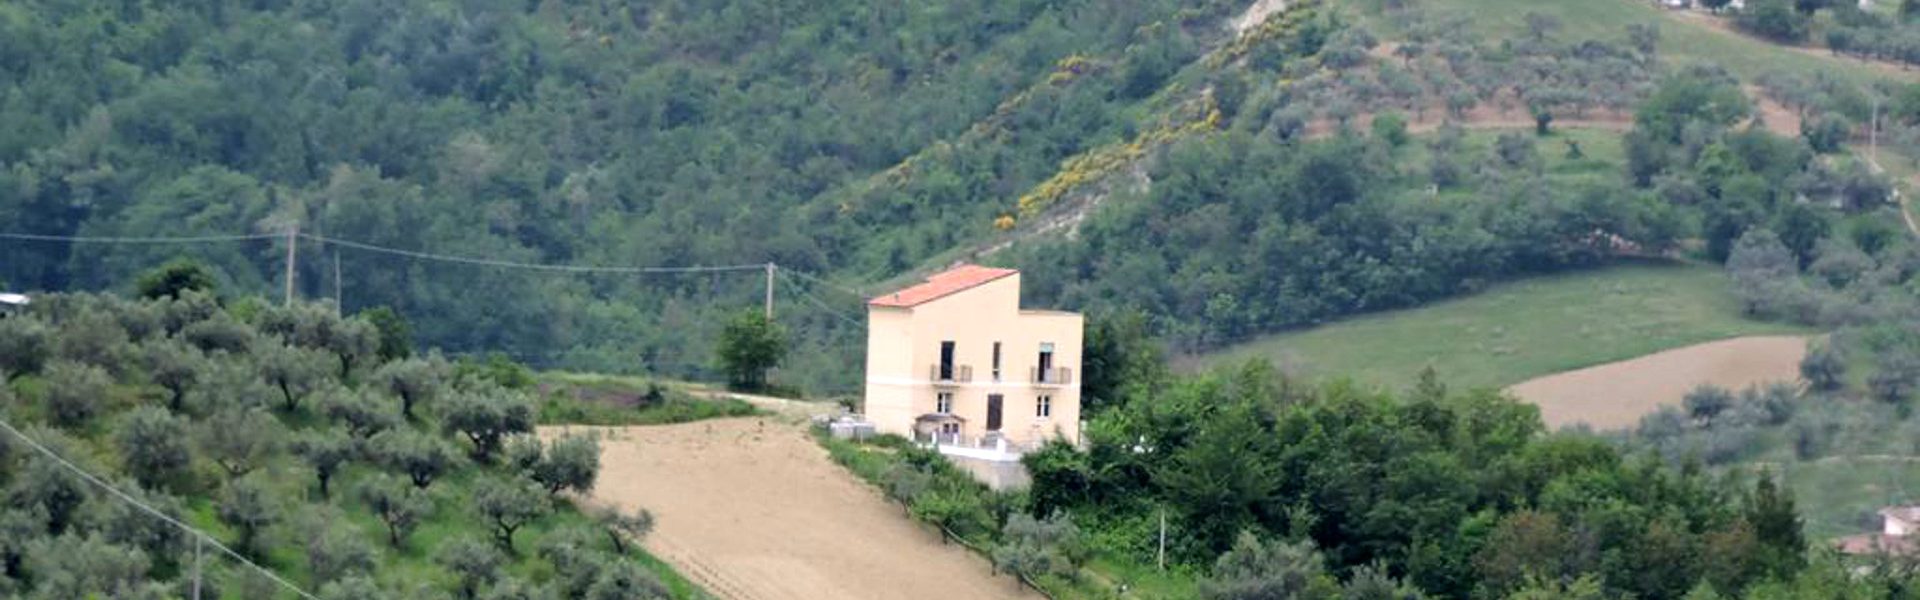 The perfect place to stay for a relaxing holiday in Abruzzo, Italy.